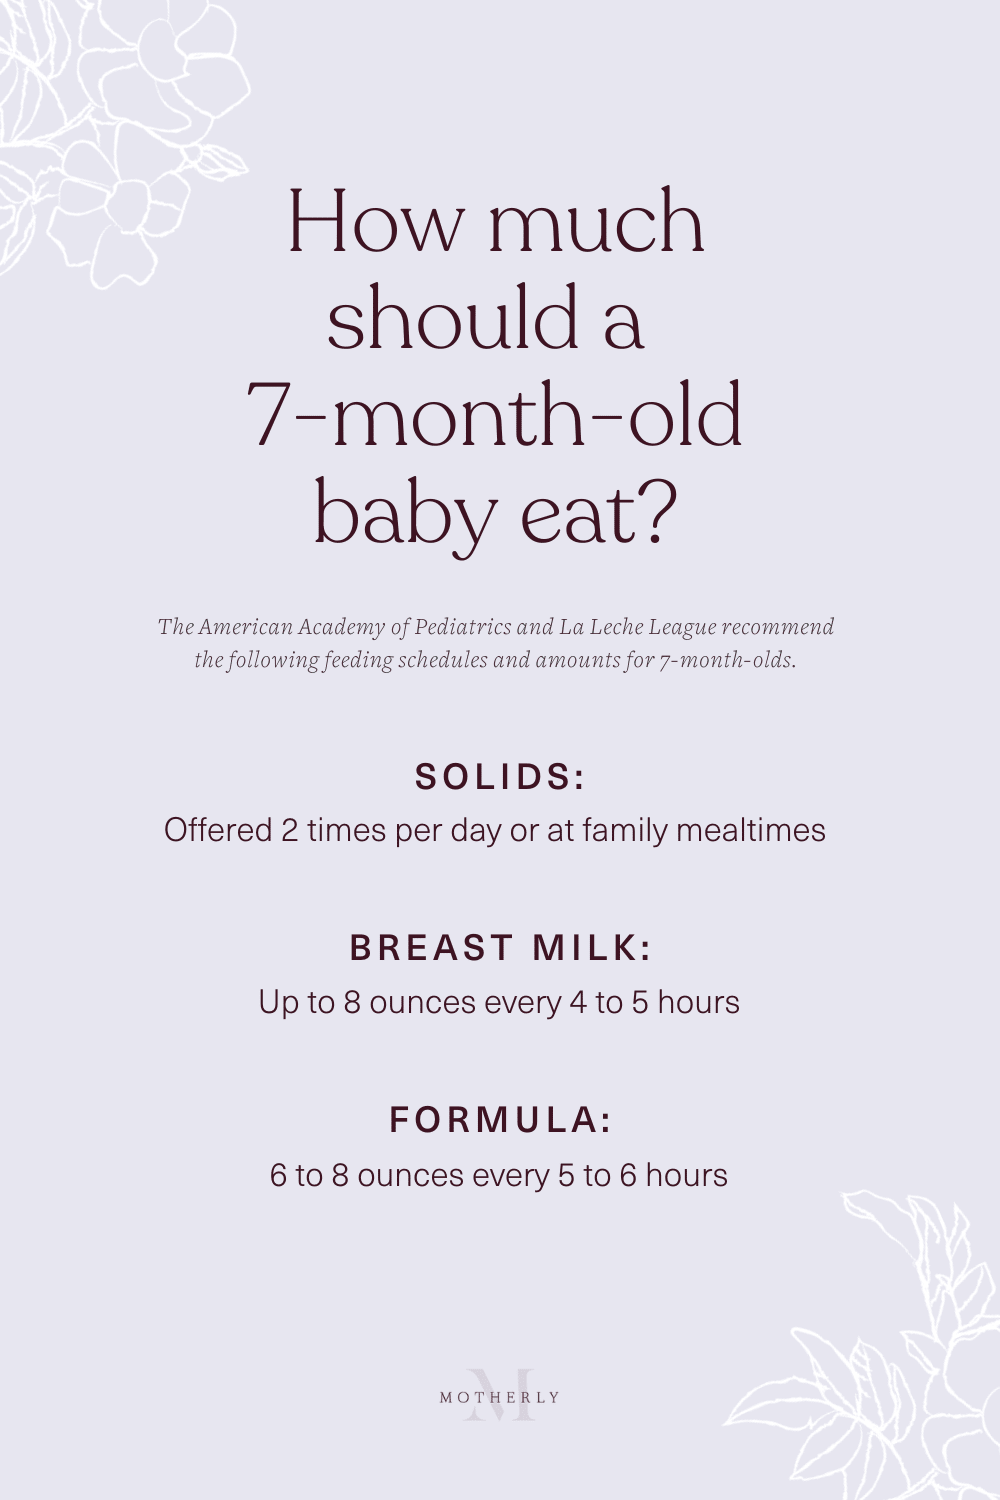 printable summary of 7-month-old baby feeding schedule - breast milk and formula